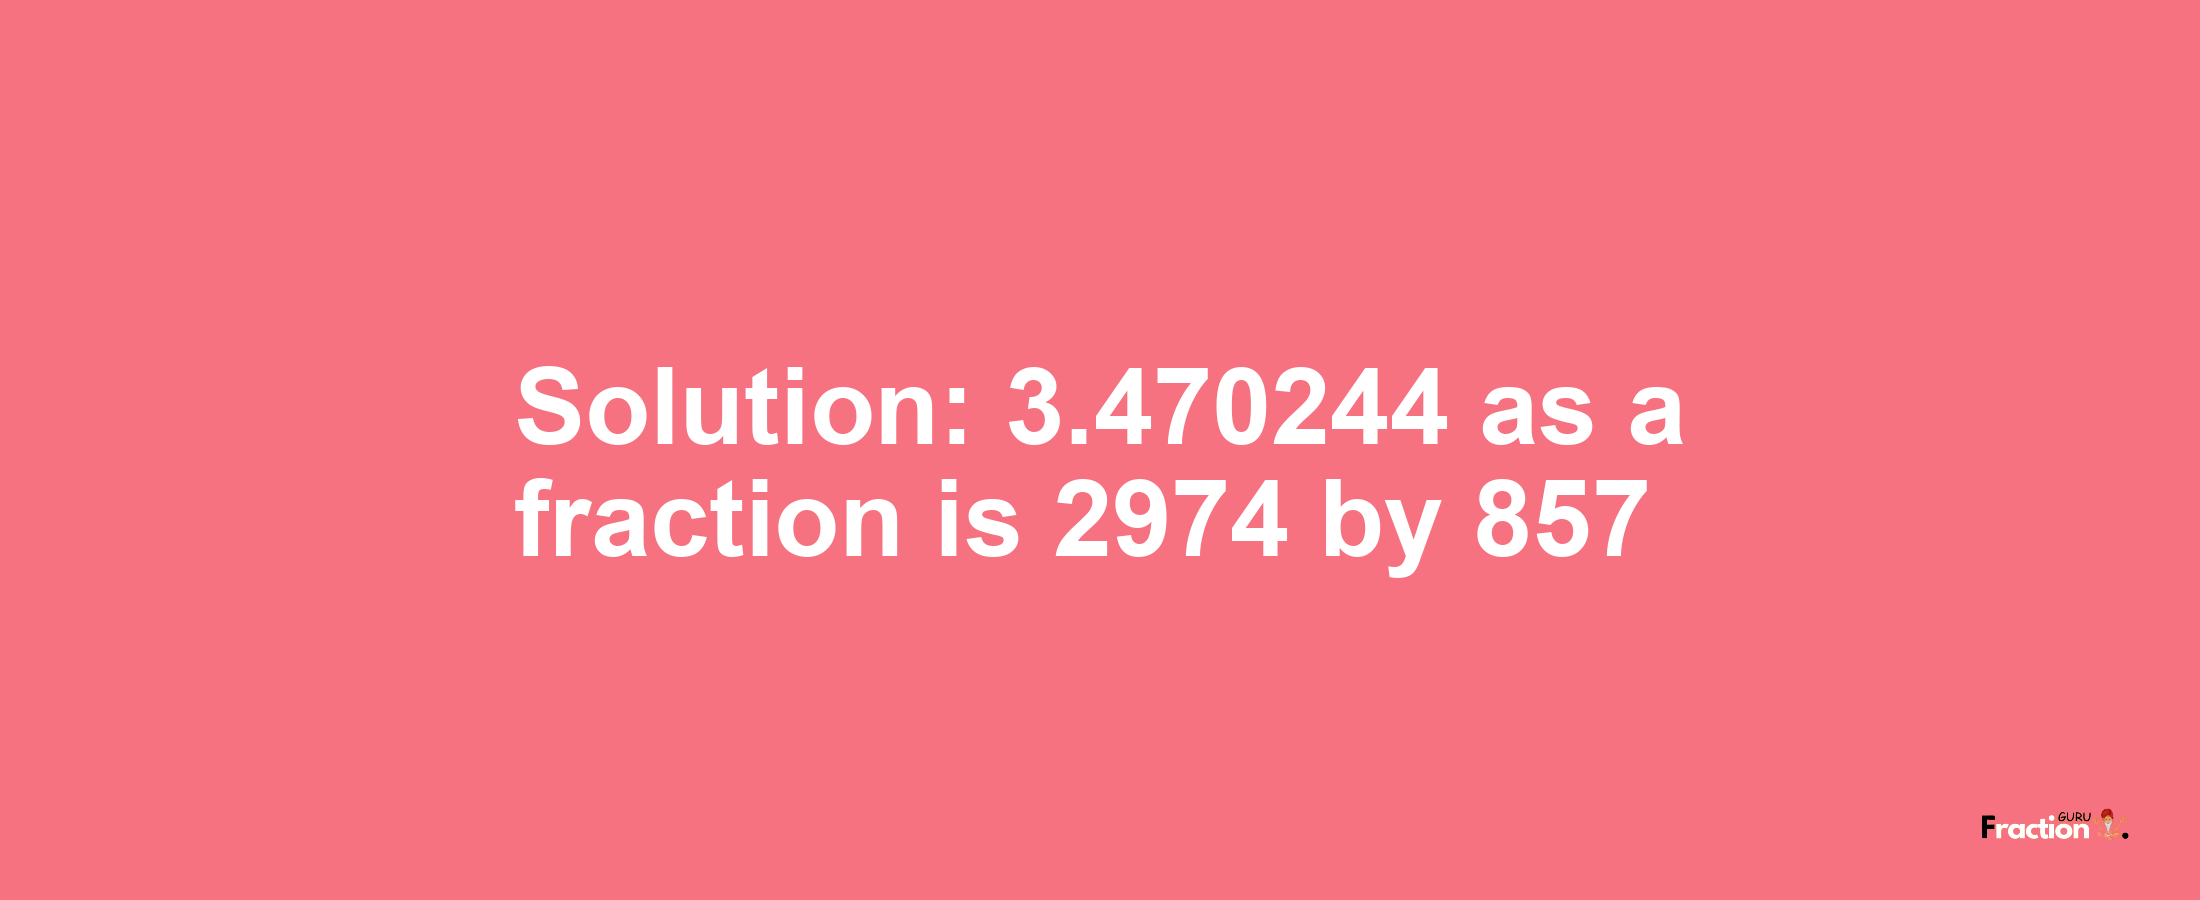 Solution:3.470244 as a fraction is 2974/857